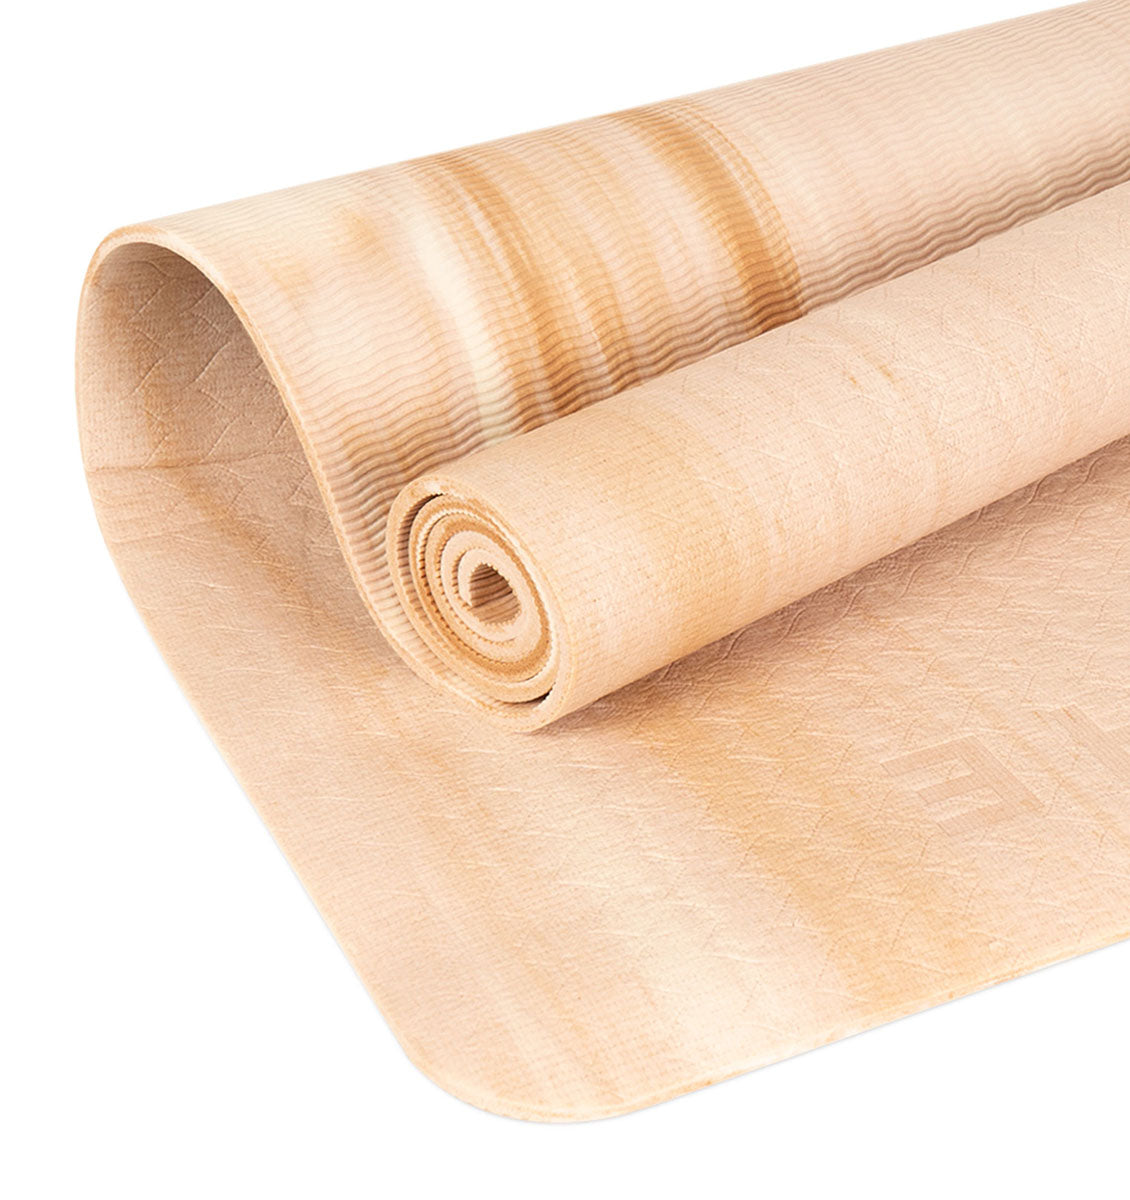 BAHE Prime Support Marble Yoga Mat - 6mm - Dusty Beige Marble - 4